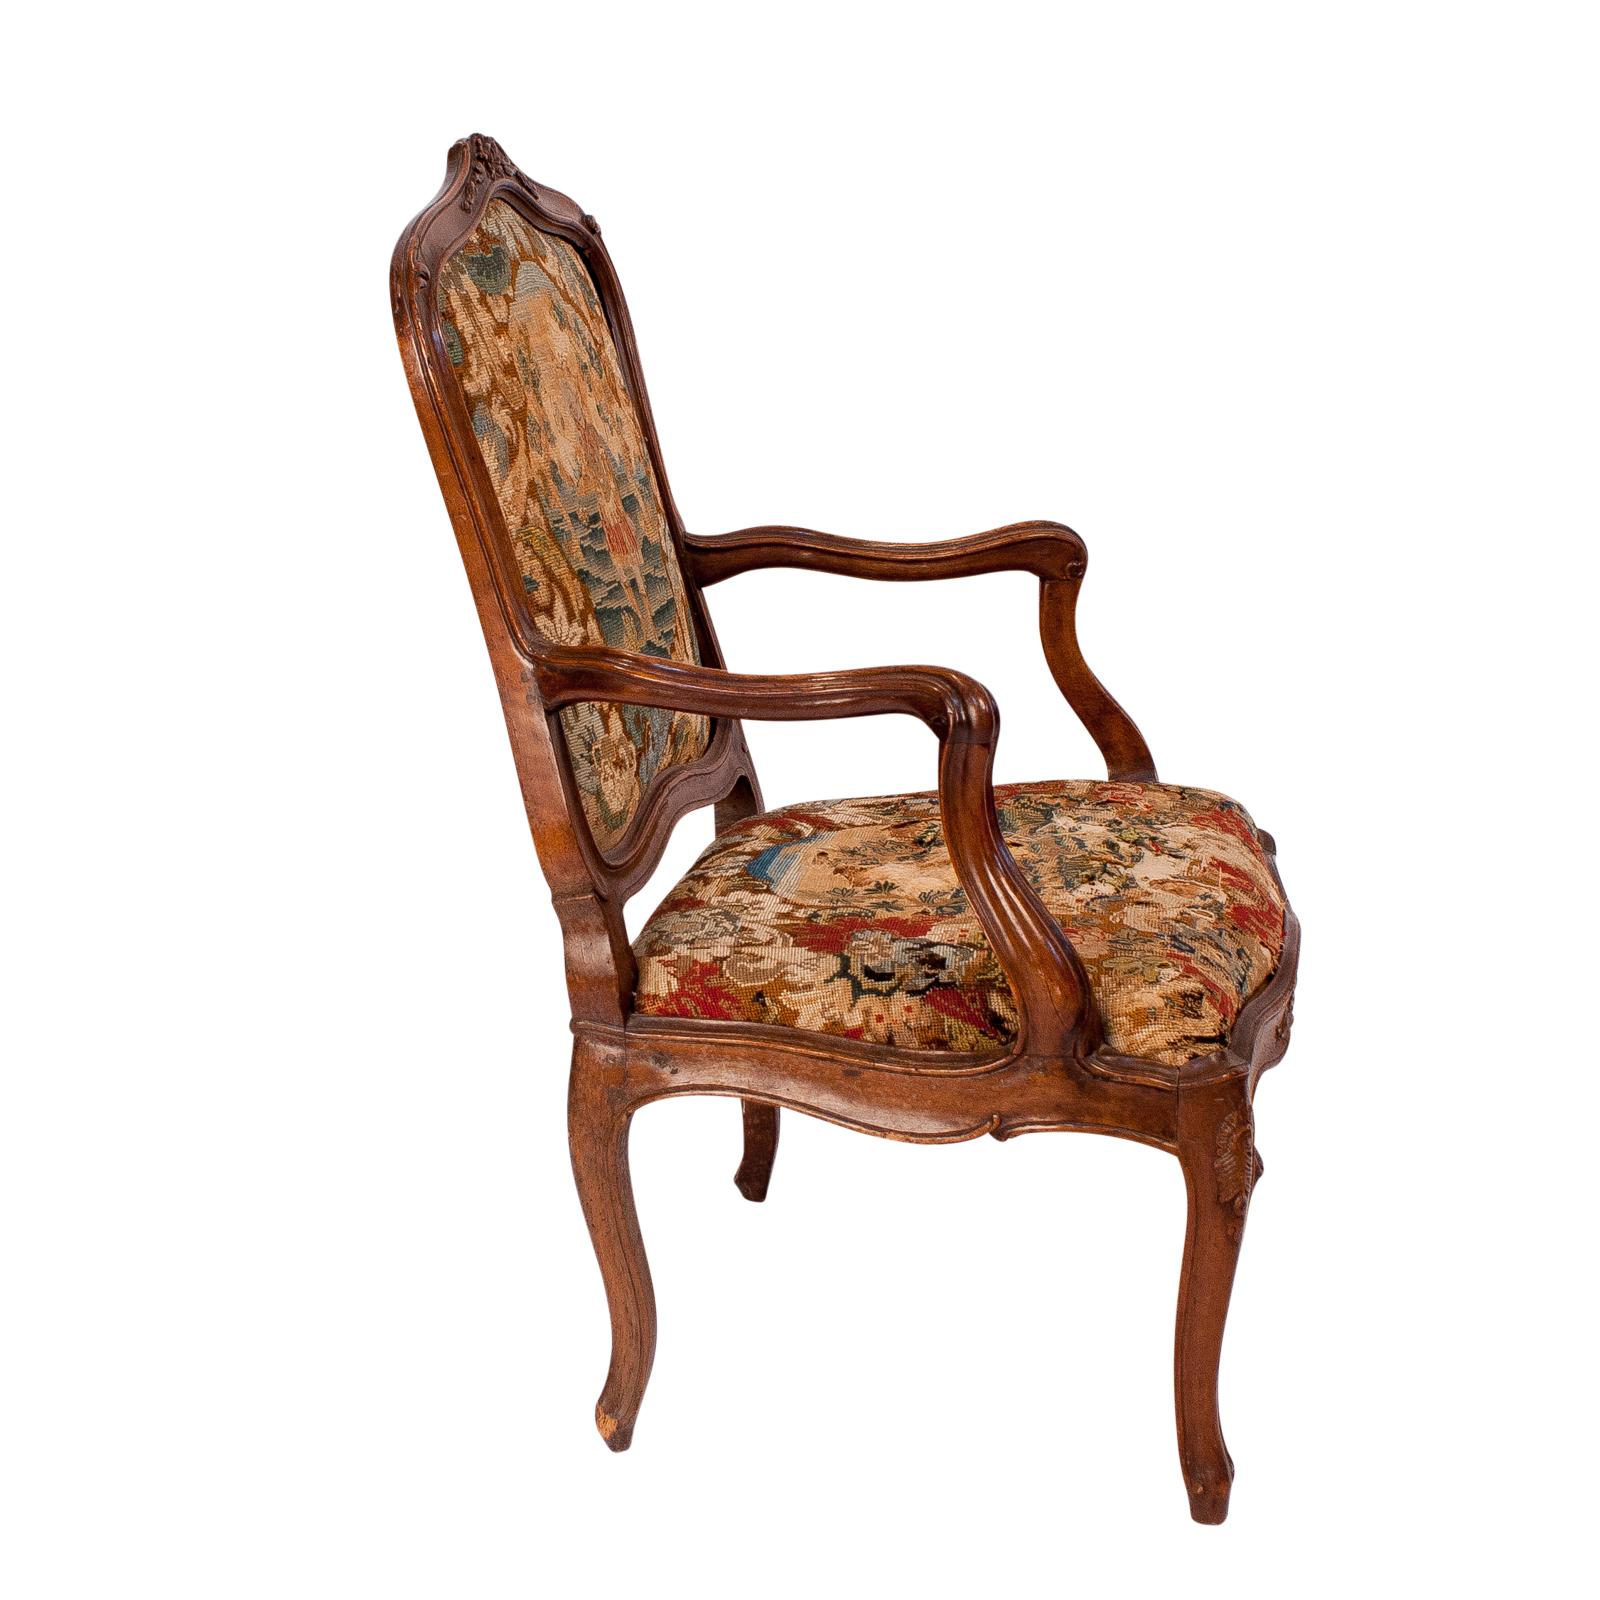 A late 18th century Italian baroque walnut armchair upholstered in tapestry. Ware to tapestry. Back in good shape seat distressed. Upholstery needs attention. These larger Italian armchairs are hard to find. This one has great old surface, wonderful